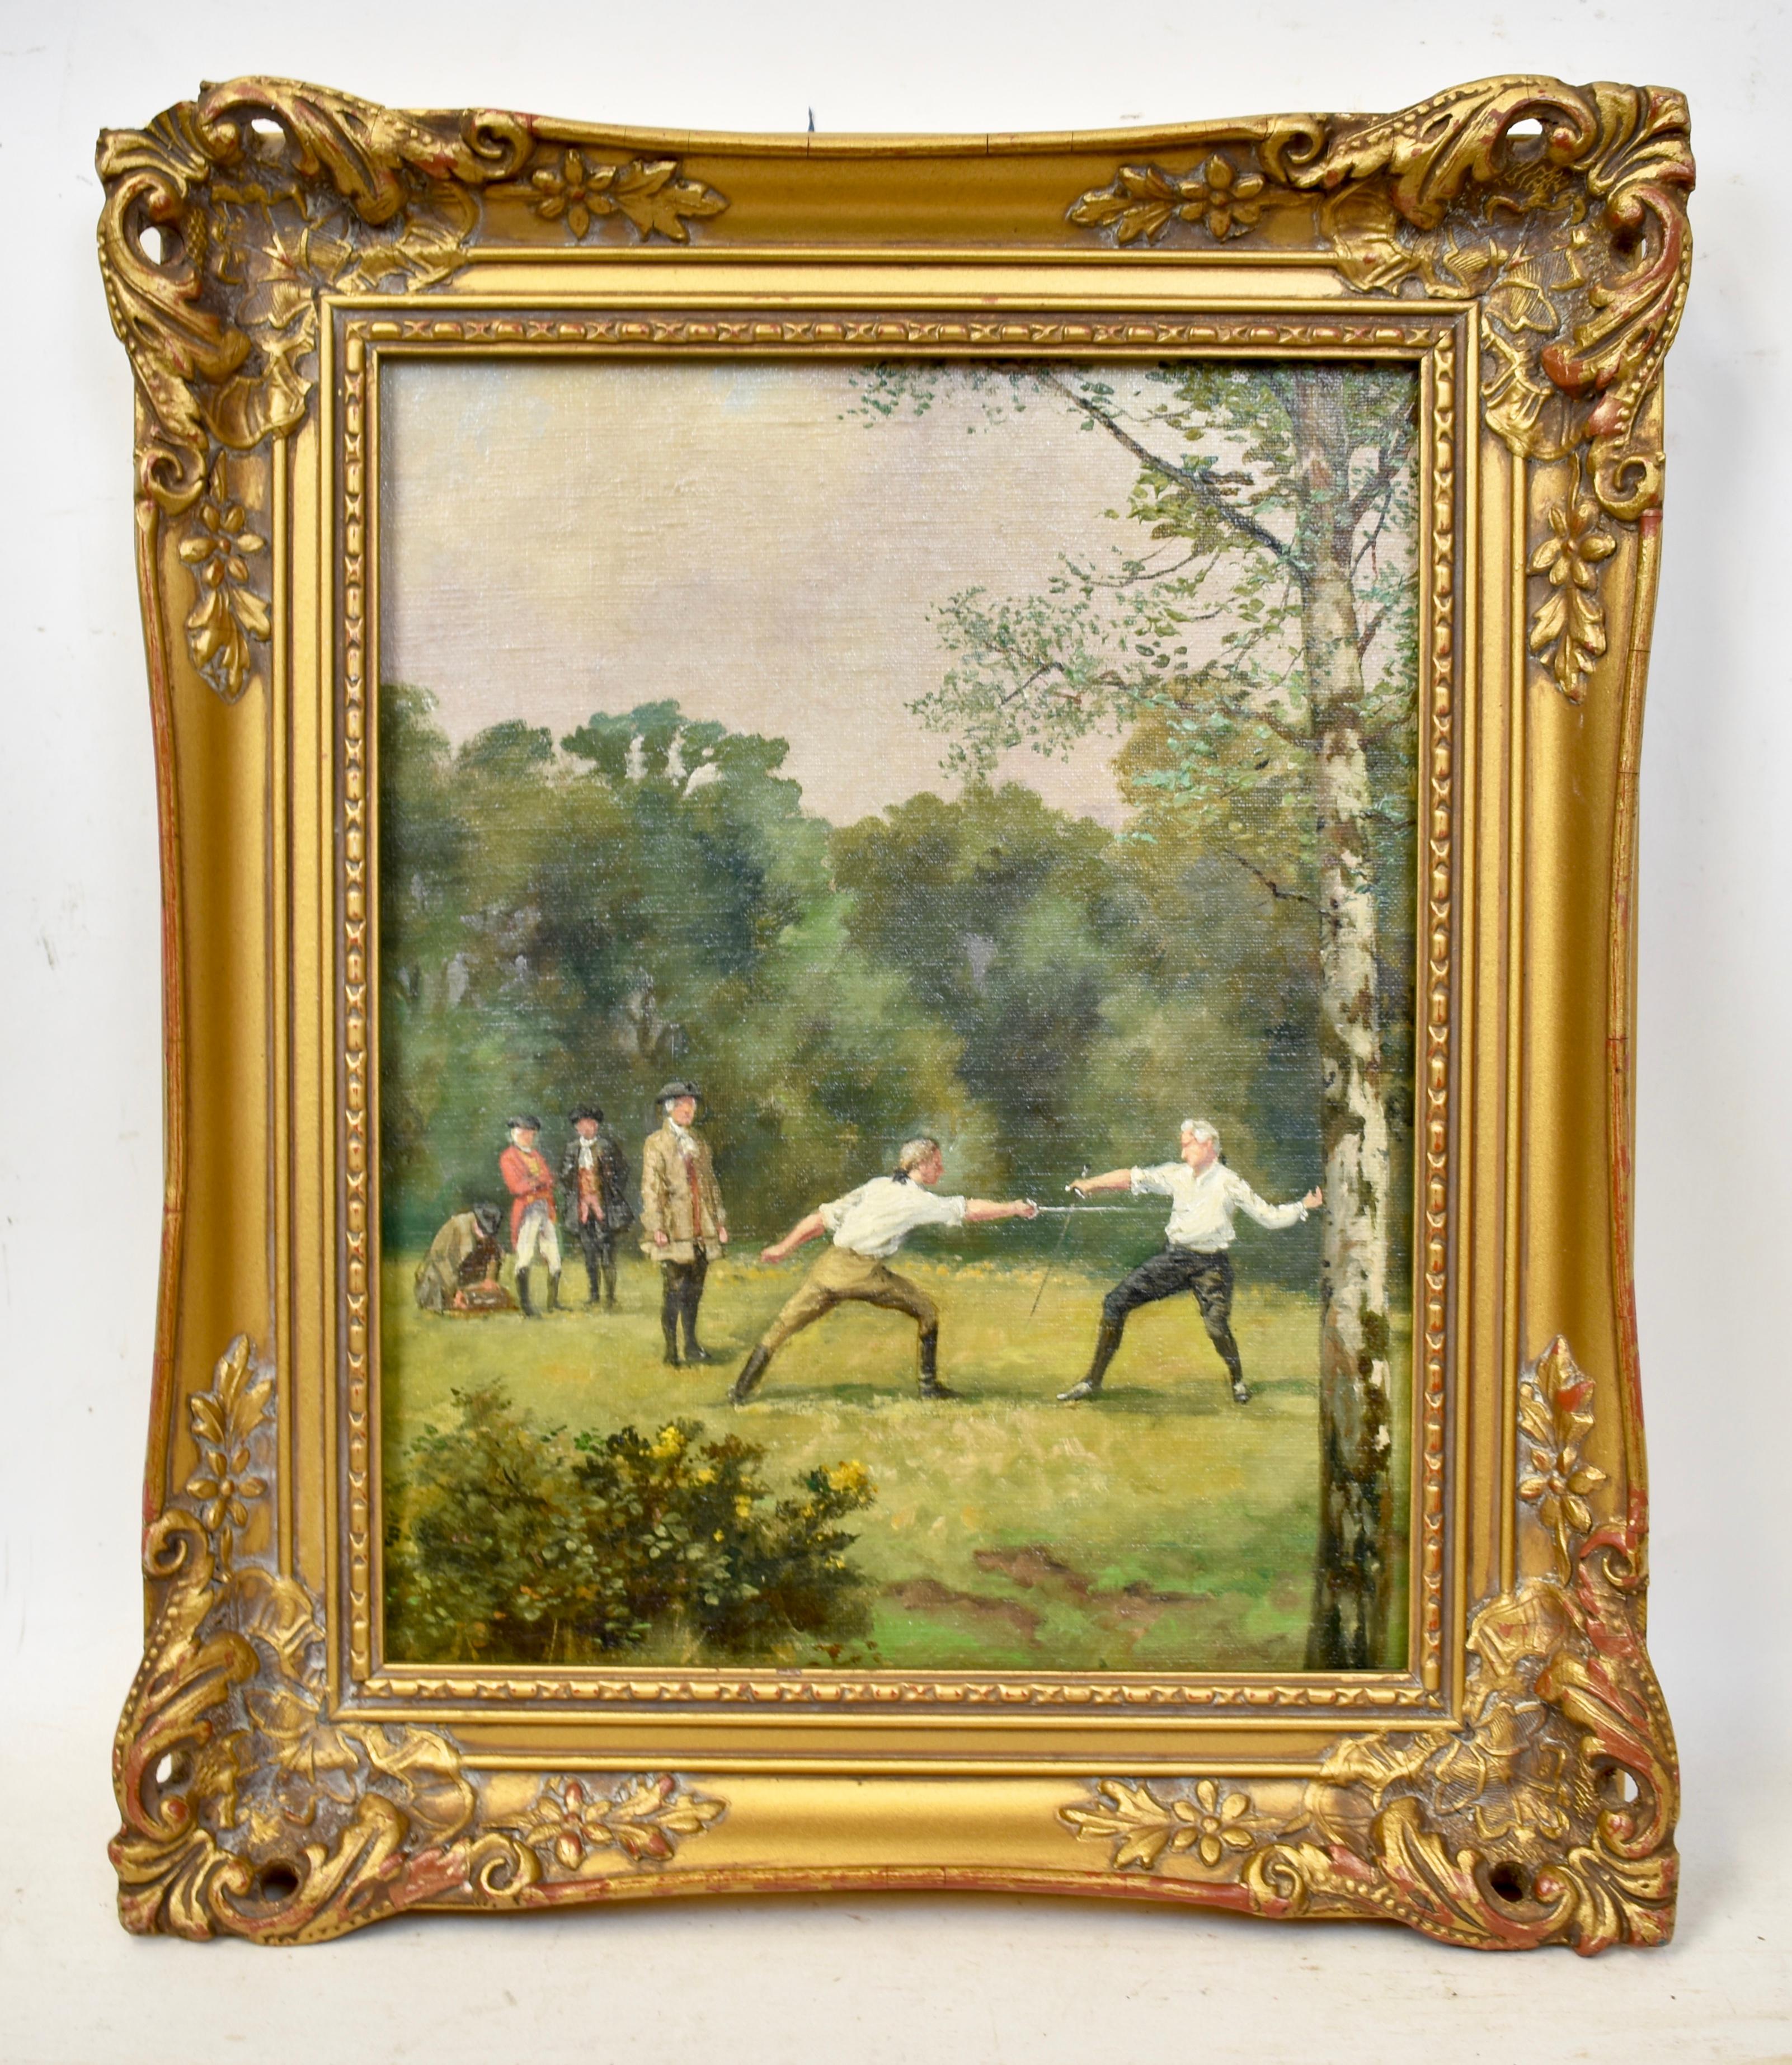 Antique English Sporting Art, Fencing in the Woods, Original Rare Oil Painting - Brown Landscape Painting by George Derville Rowlandson  (1861 - 1928)